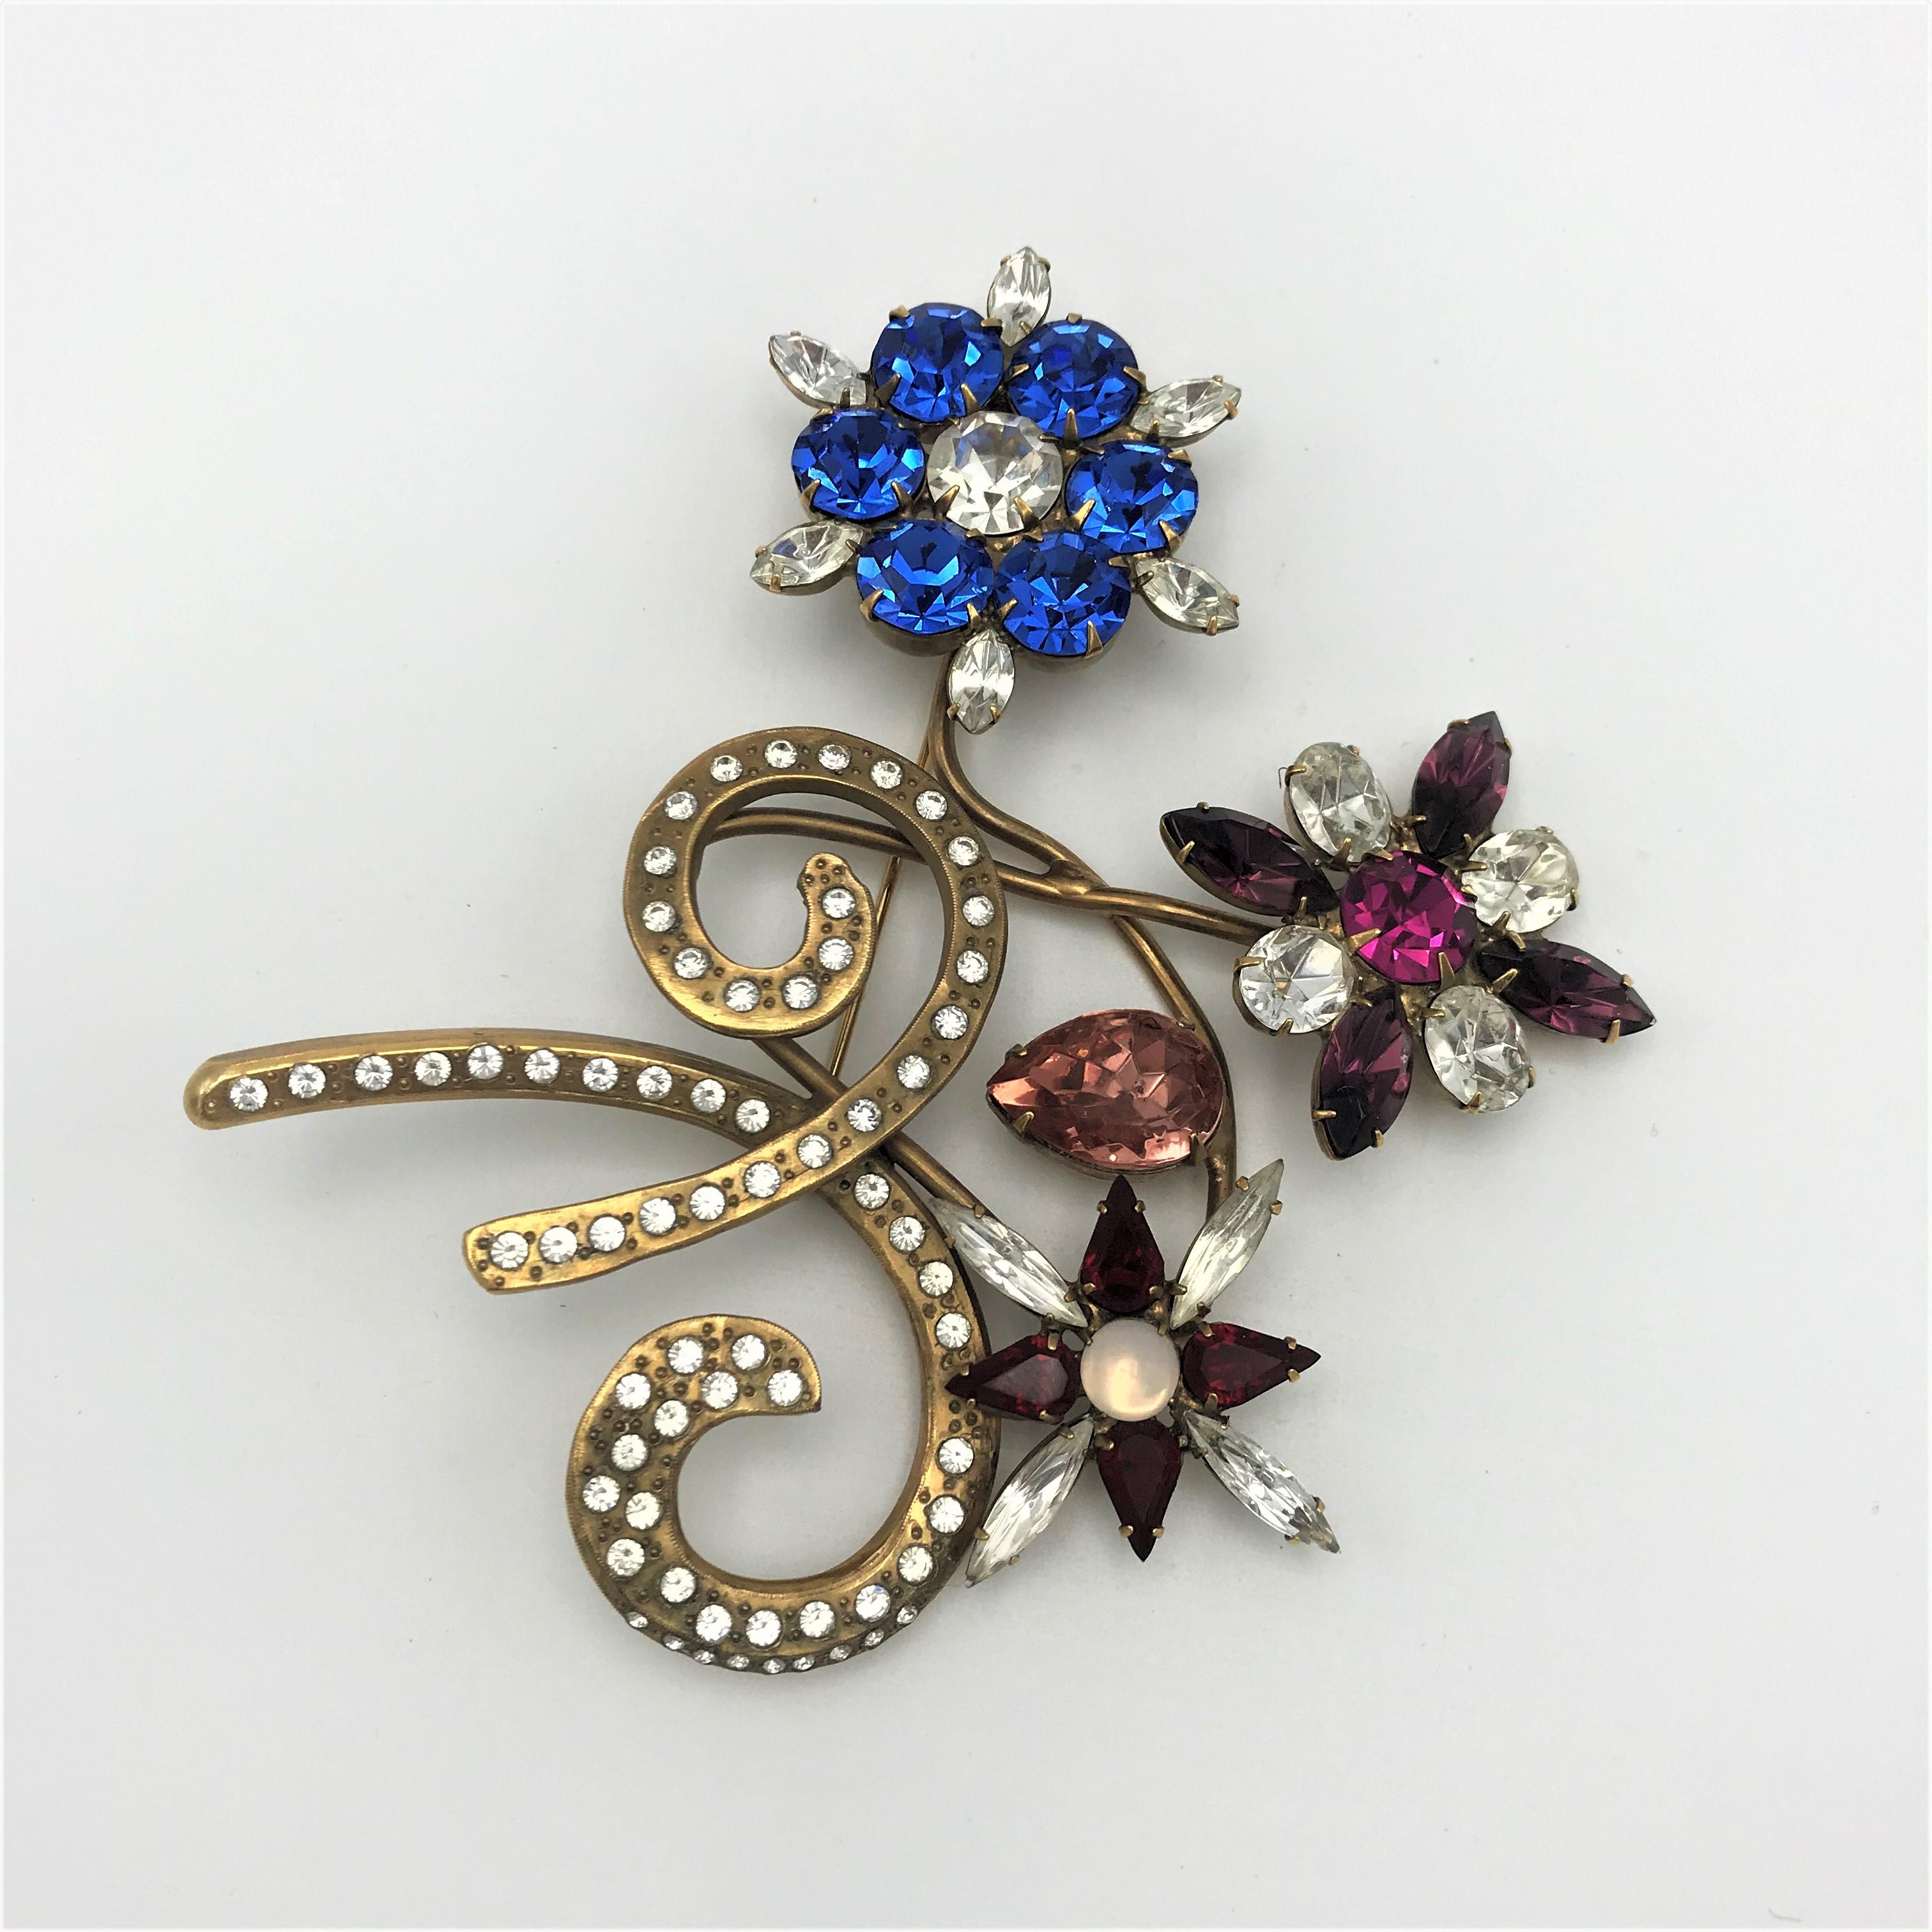 Magnificent John Catalano great brooch with three different rhinestones flowers in shape and color. A bow set with rhinestones holds the flowers, and be worn in different directions. The brooch is signed CATALANO  and gold plated. A vintage